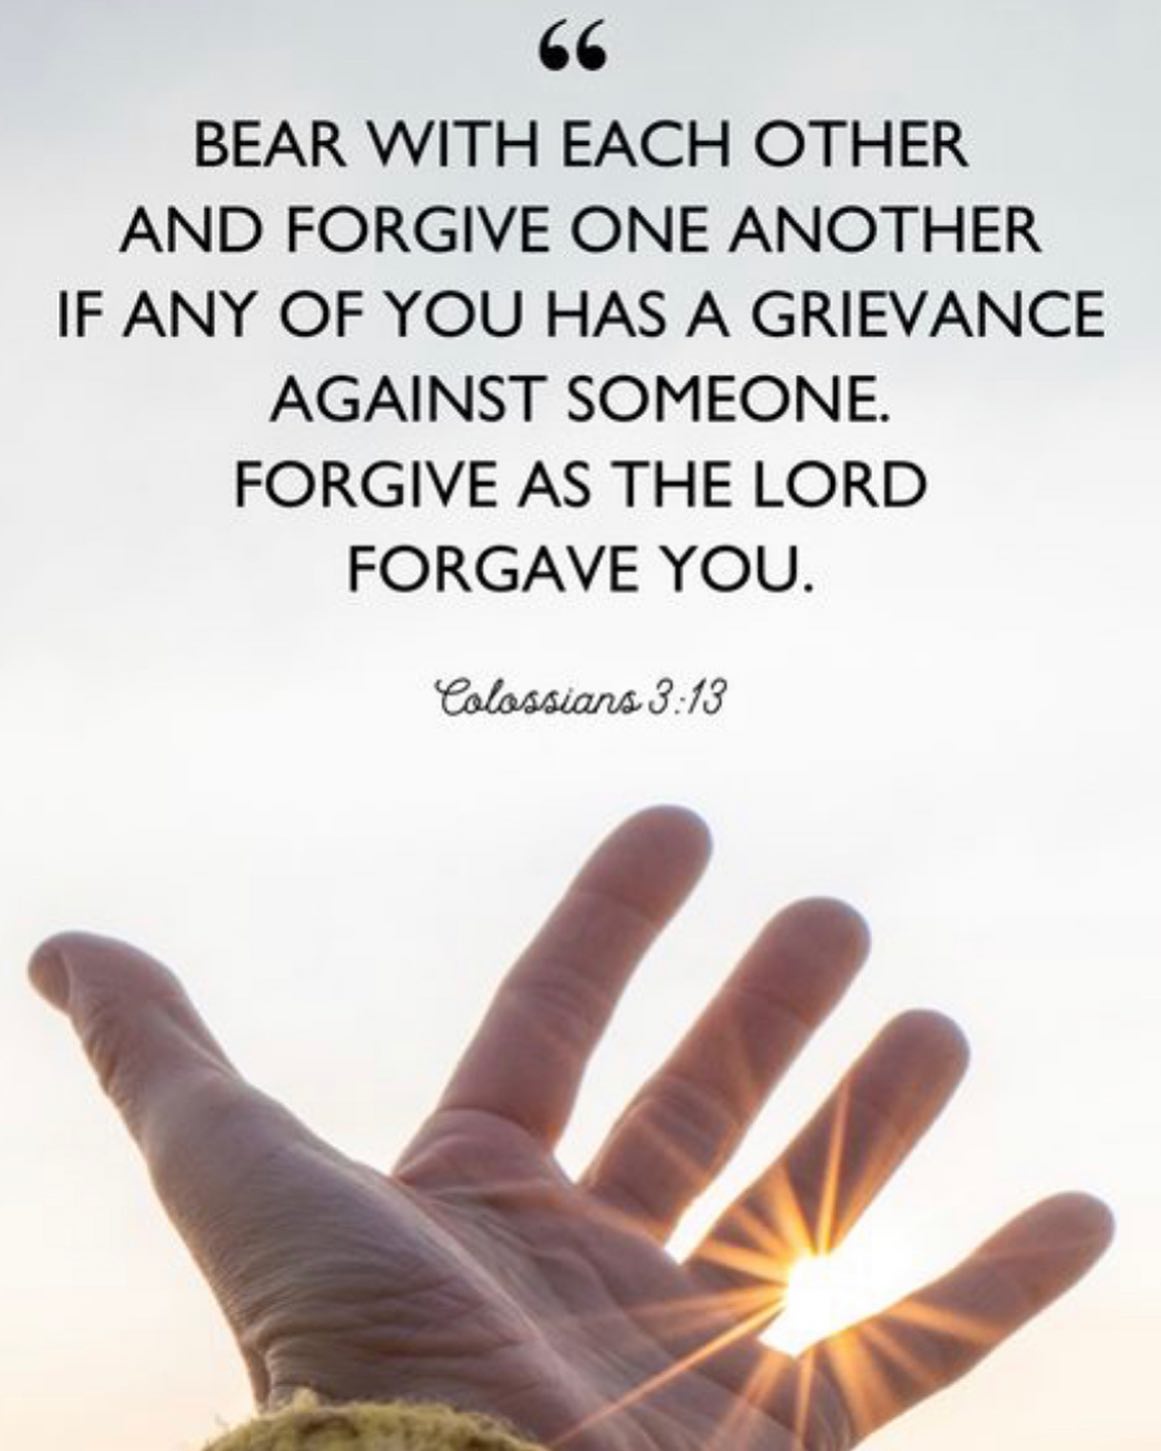 Forgive each other and have grace as you go through the day! Blessings this first Sunday in December.